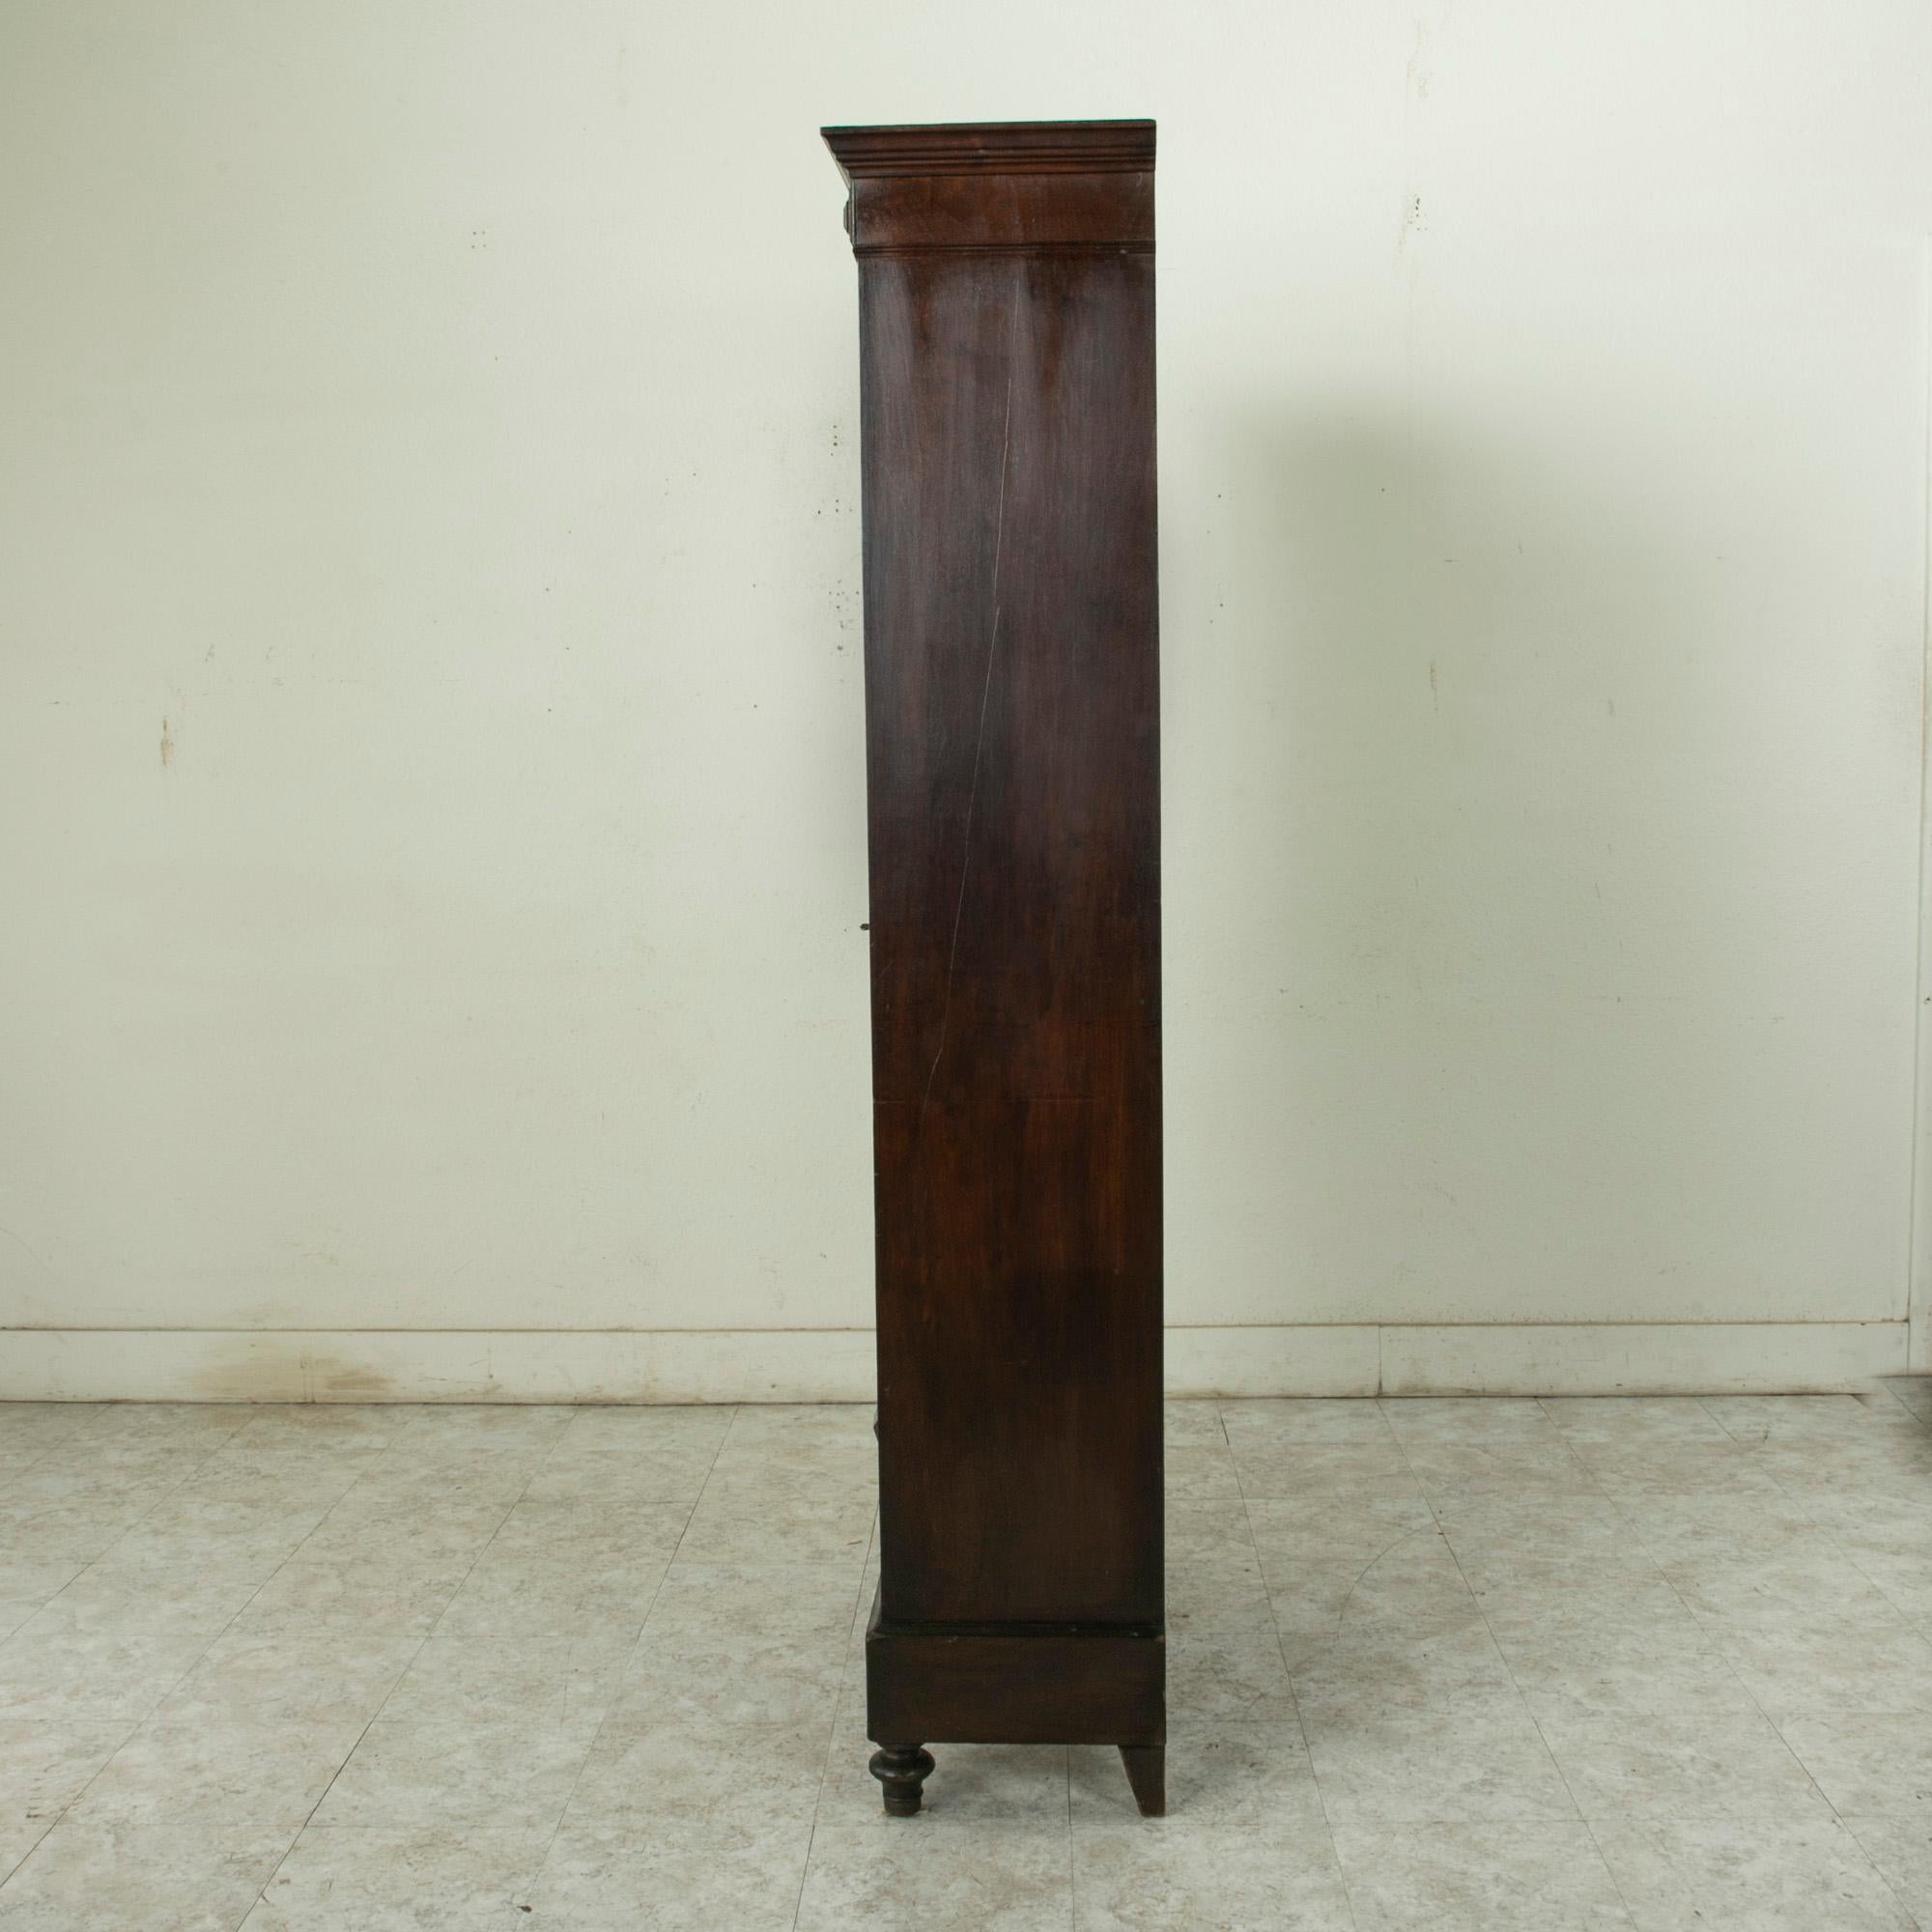 This small scale late nineteenth century Henri II walnut bibliotheque or bookcase rests on finial feet and features fluted columns flanking its original hand blown glass doors. A simple diamond carving adorns the corners of its upper transom, and